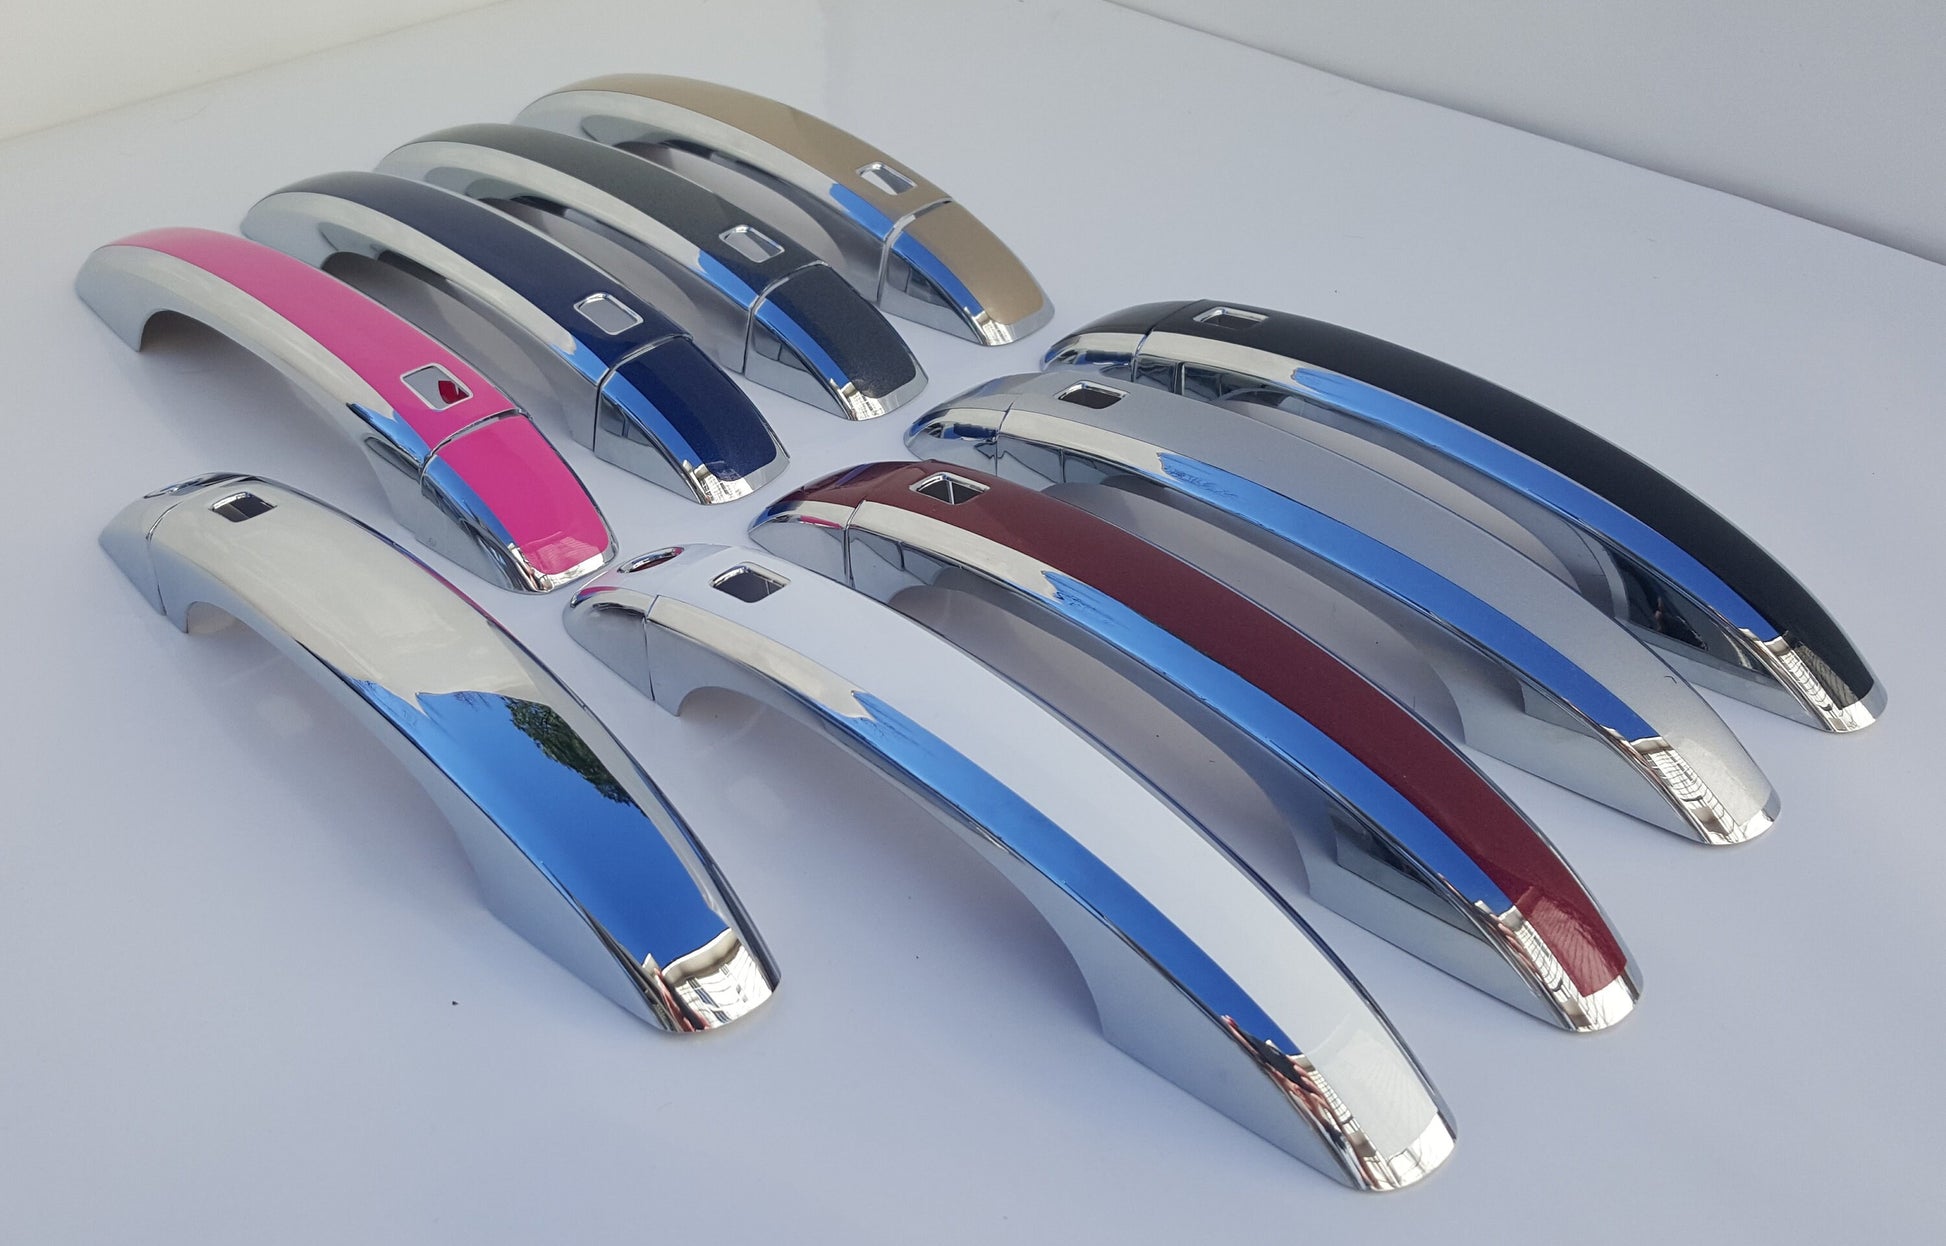 Full Set of Custom Chrome Door Handle Overlays / Covers For the 2010 – 2014 Audi S4 -- You Choose the Middle Color Insert